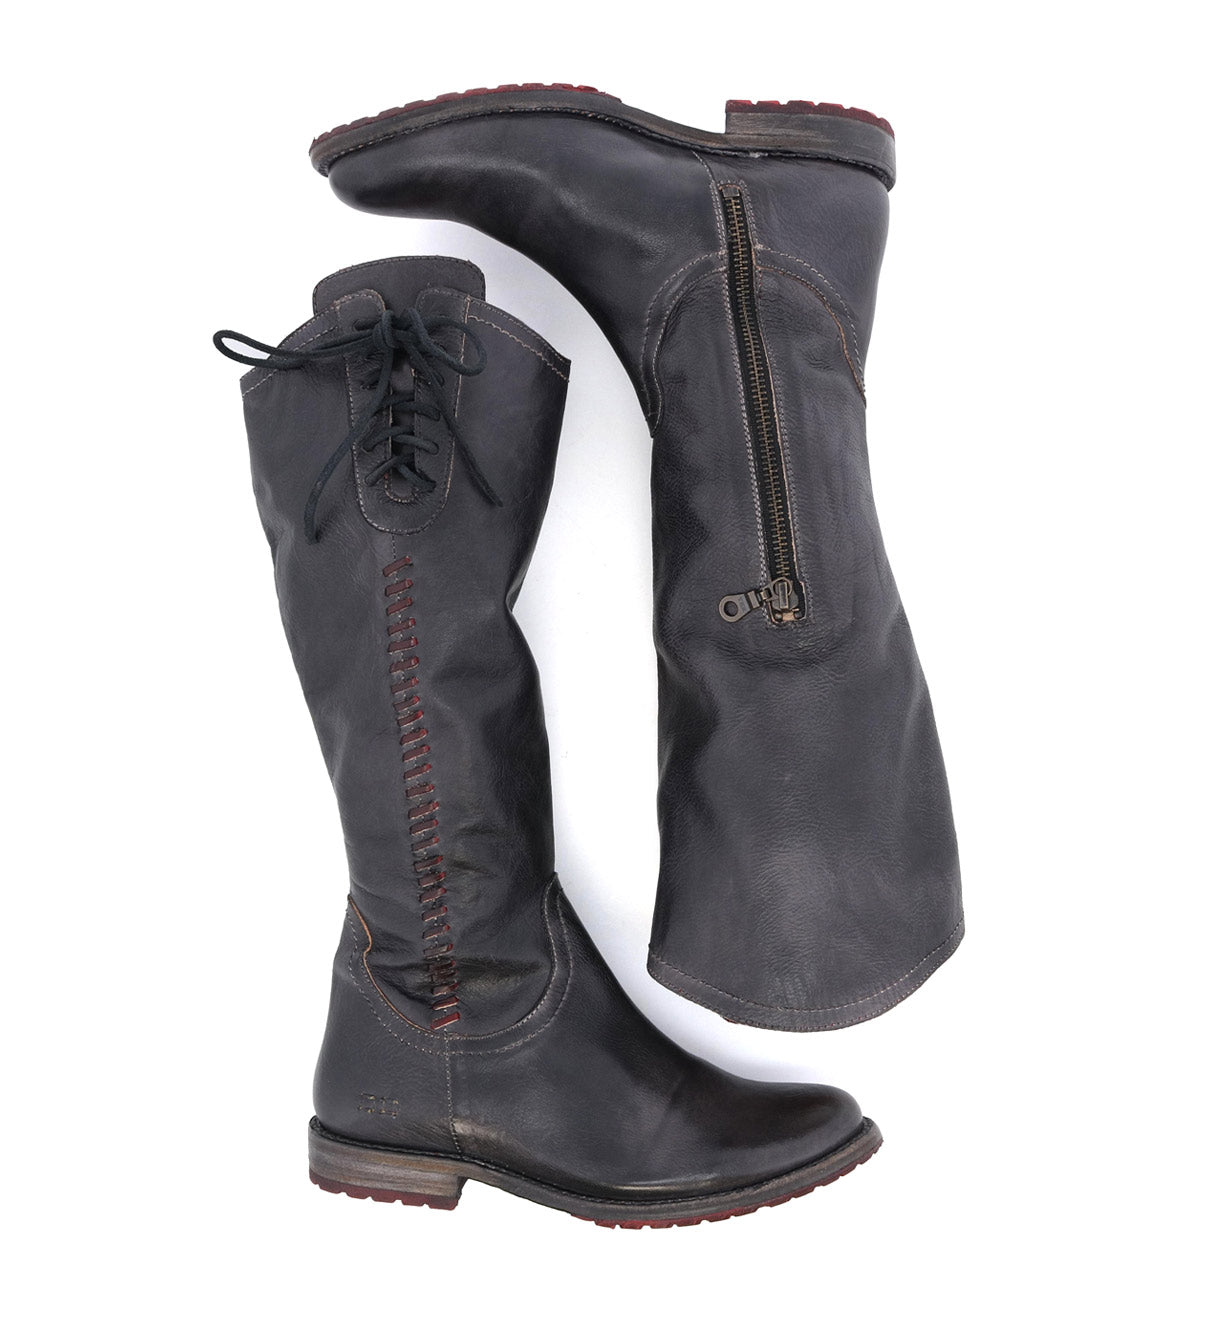 A pair of Janina boots with zippers on the side made by Bed Stu.